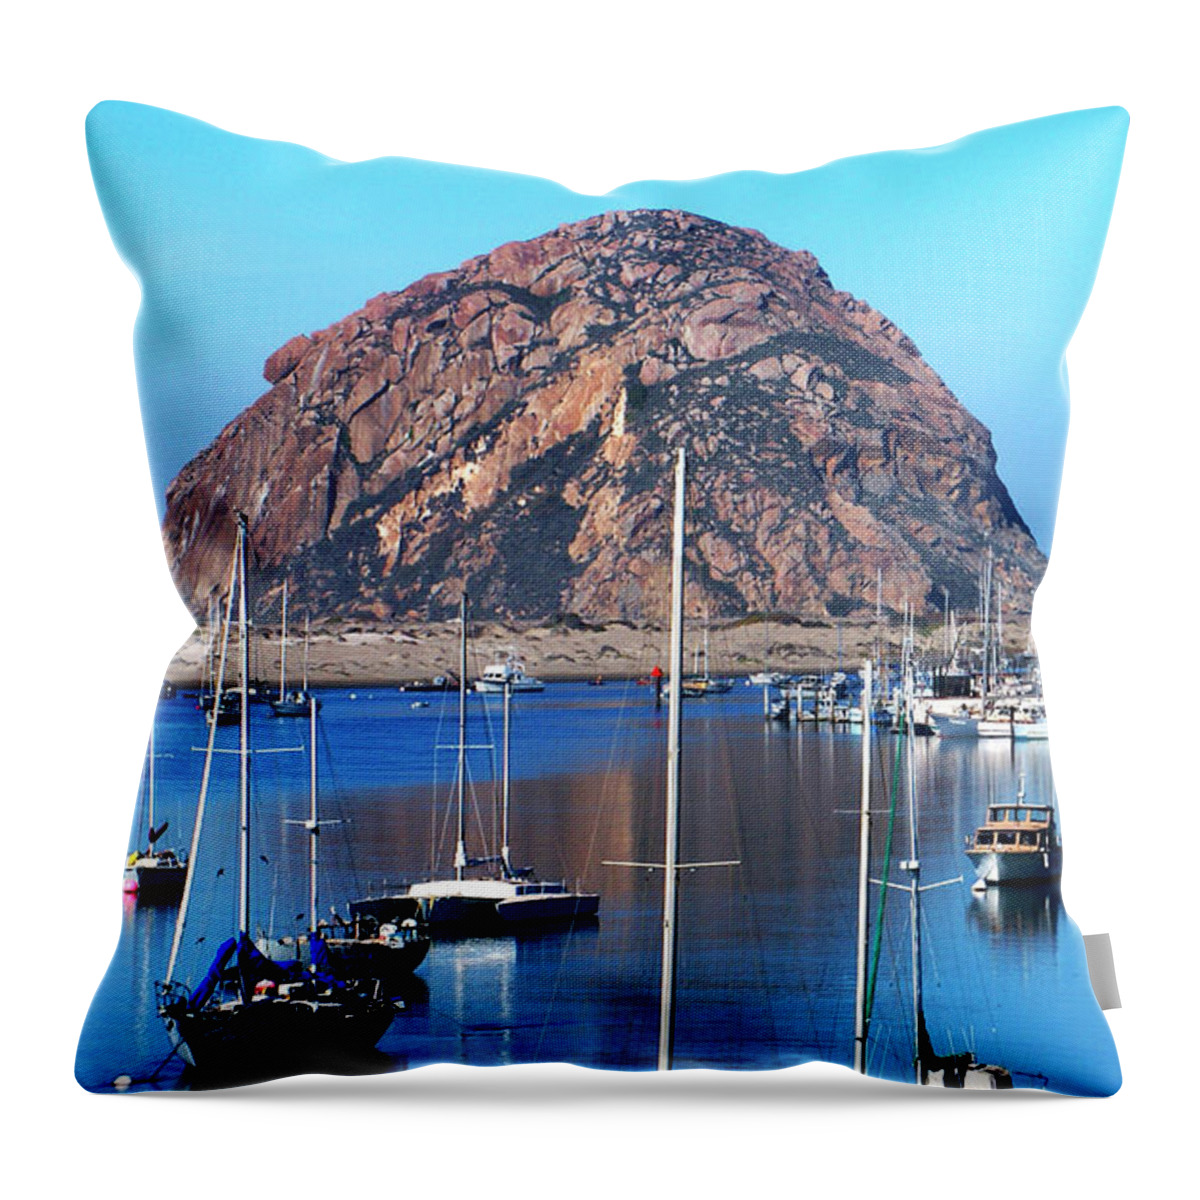 Bay View Detail Morro Bay California Throw Pillow featuring the photograph Bay View Detail Morro Bay California by Barbara Snyder